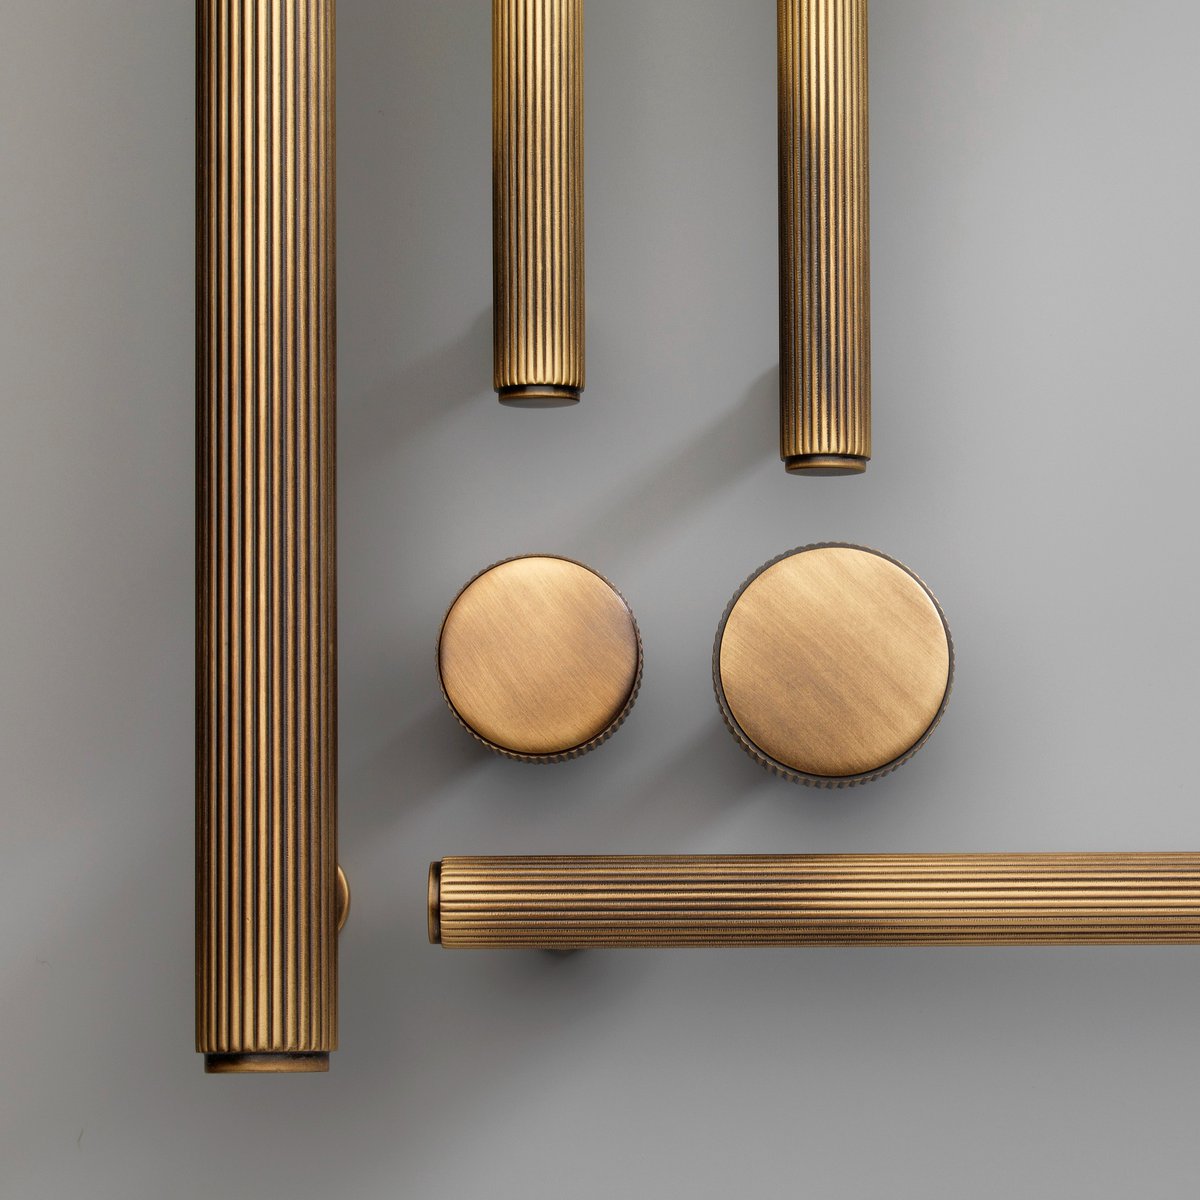 Brushed Bronze is Beautiful! Bespoke and beautifully hand-finished in our Birmingham factory - exclusively in the Special Works range. loom.ly/UQrquxE #bronze #bespoke #exquisitehardware #brasshandle #brassknob #kitchen #kitchengoals #antique